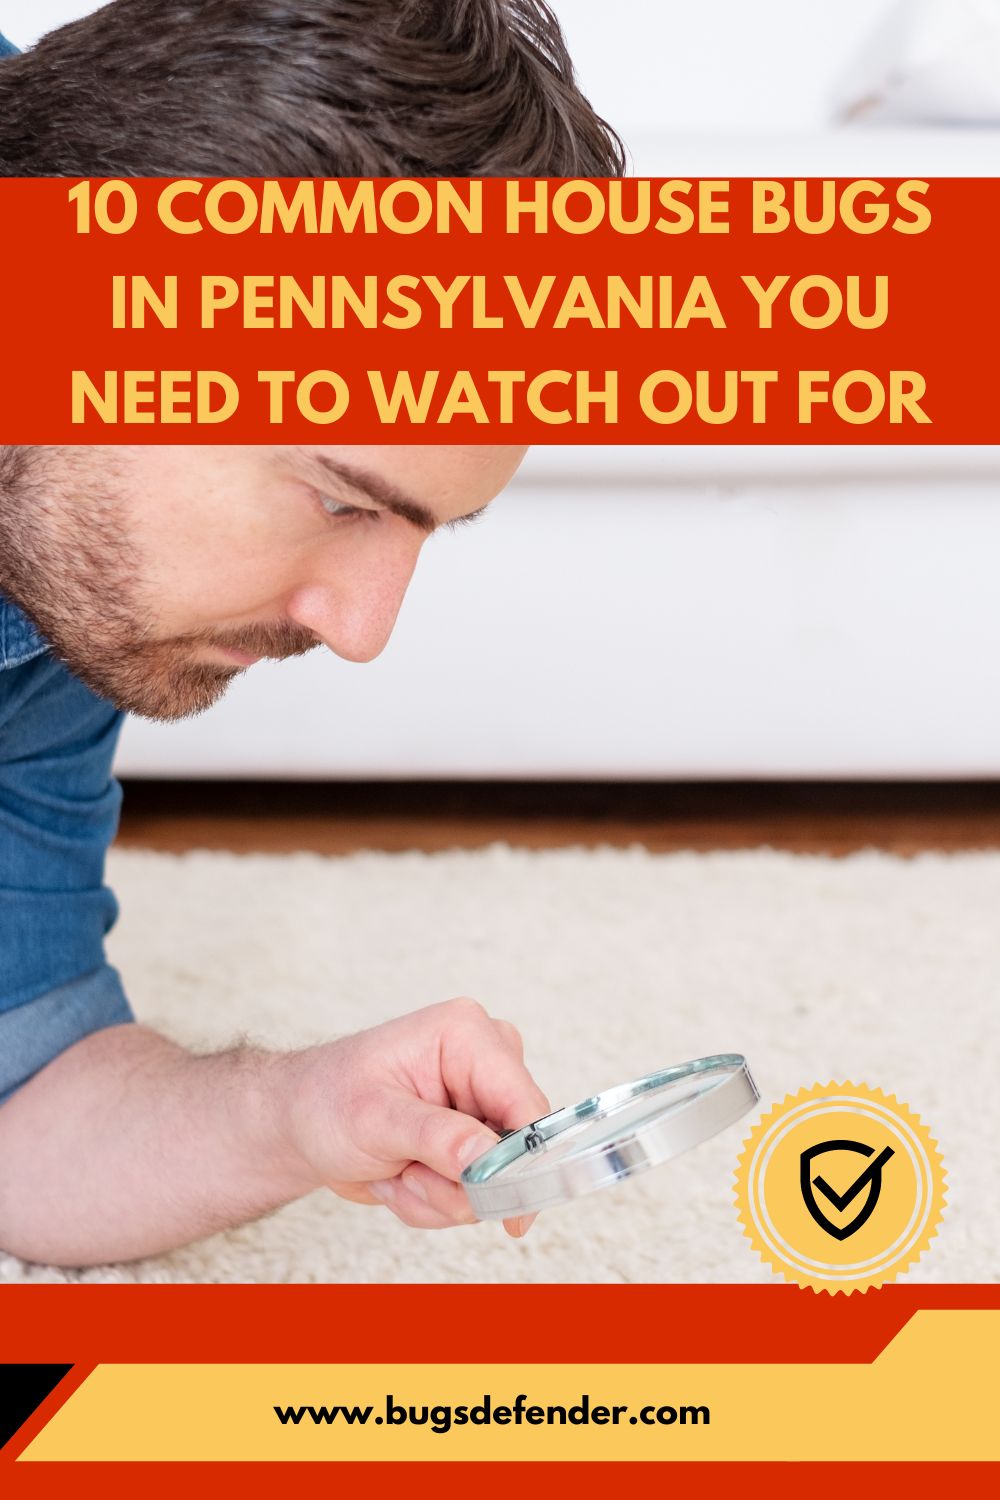 10 Common House Bugs in Pennsylvania You Need To Watch Out For pin 1